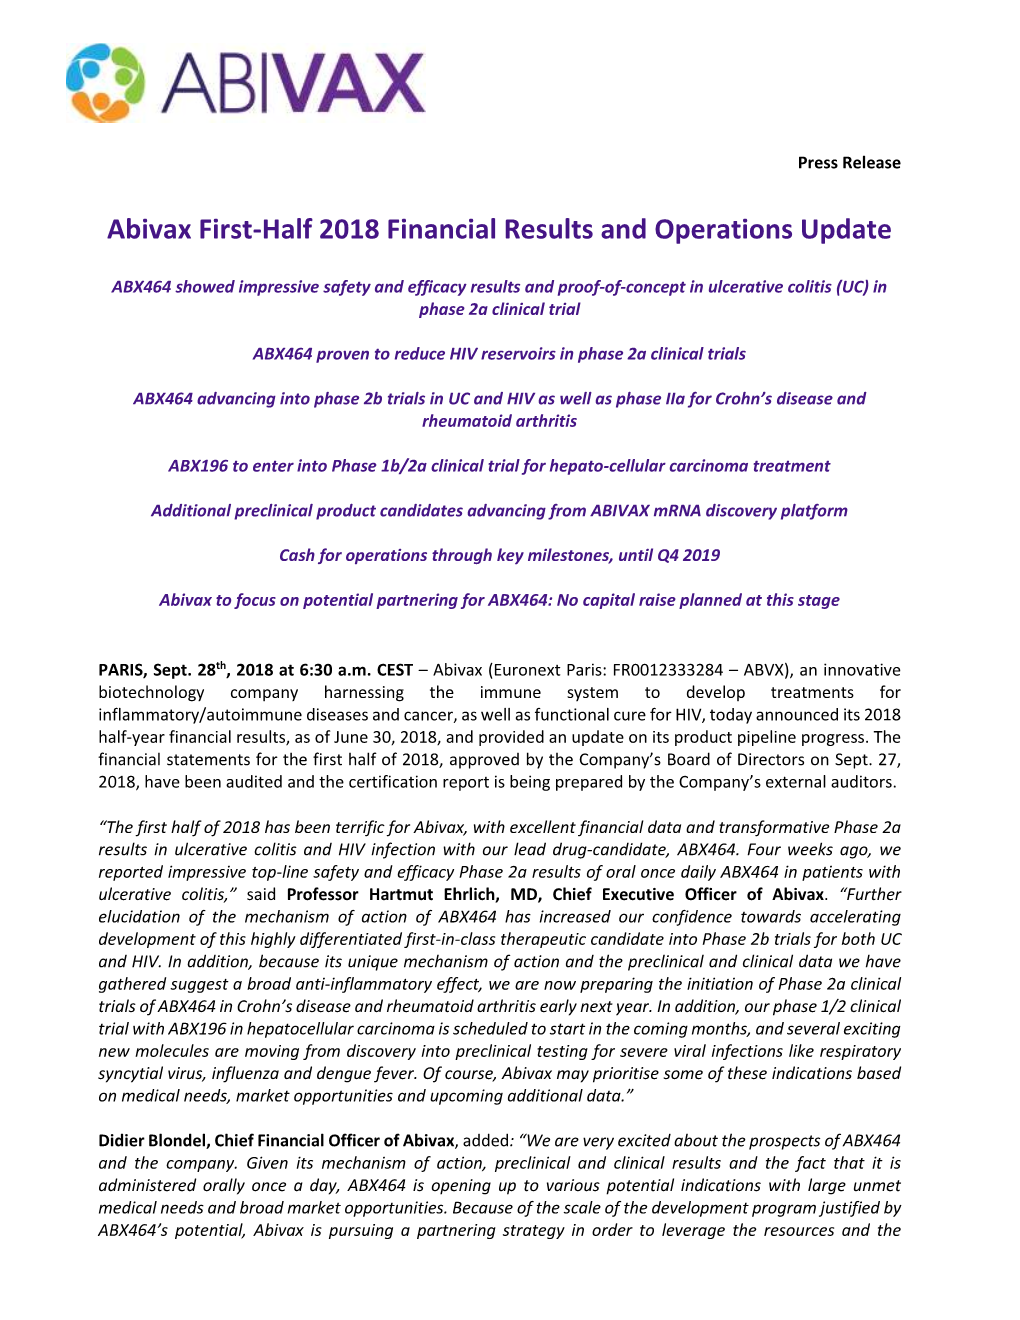 Abivax First-Half 2018 Financial Results and Operations Update